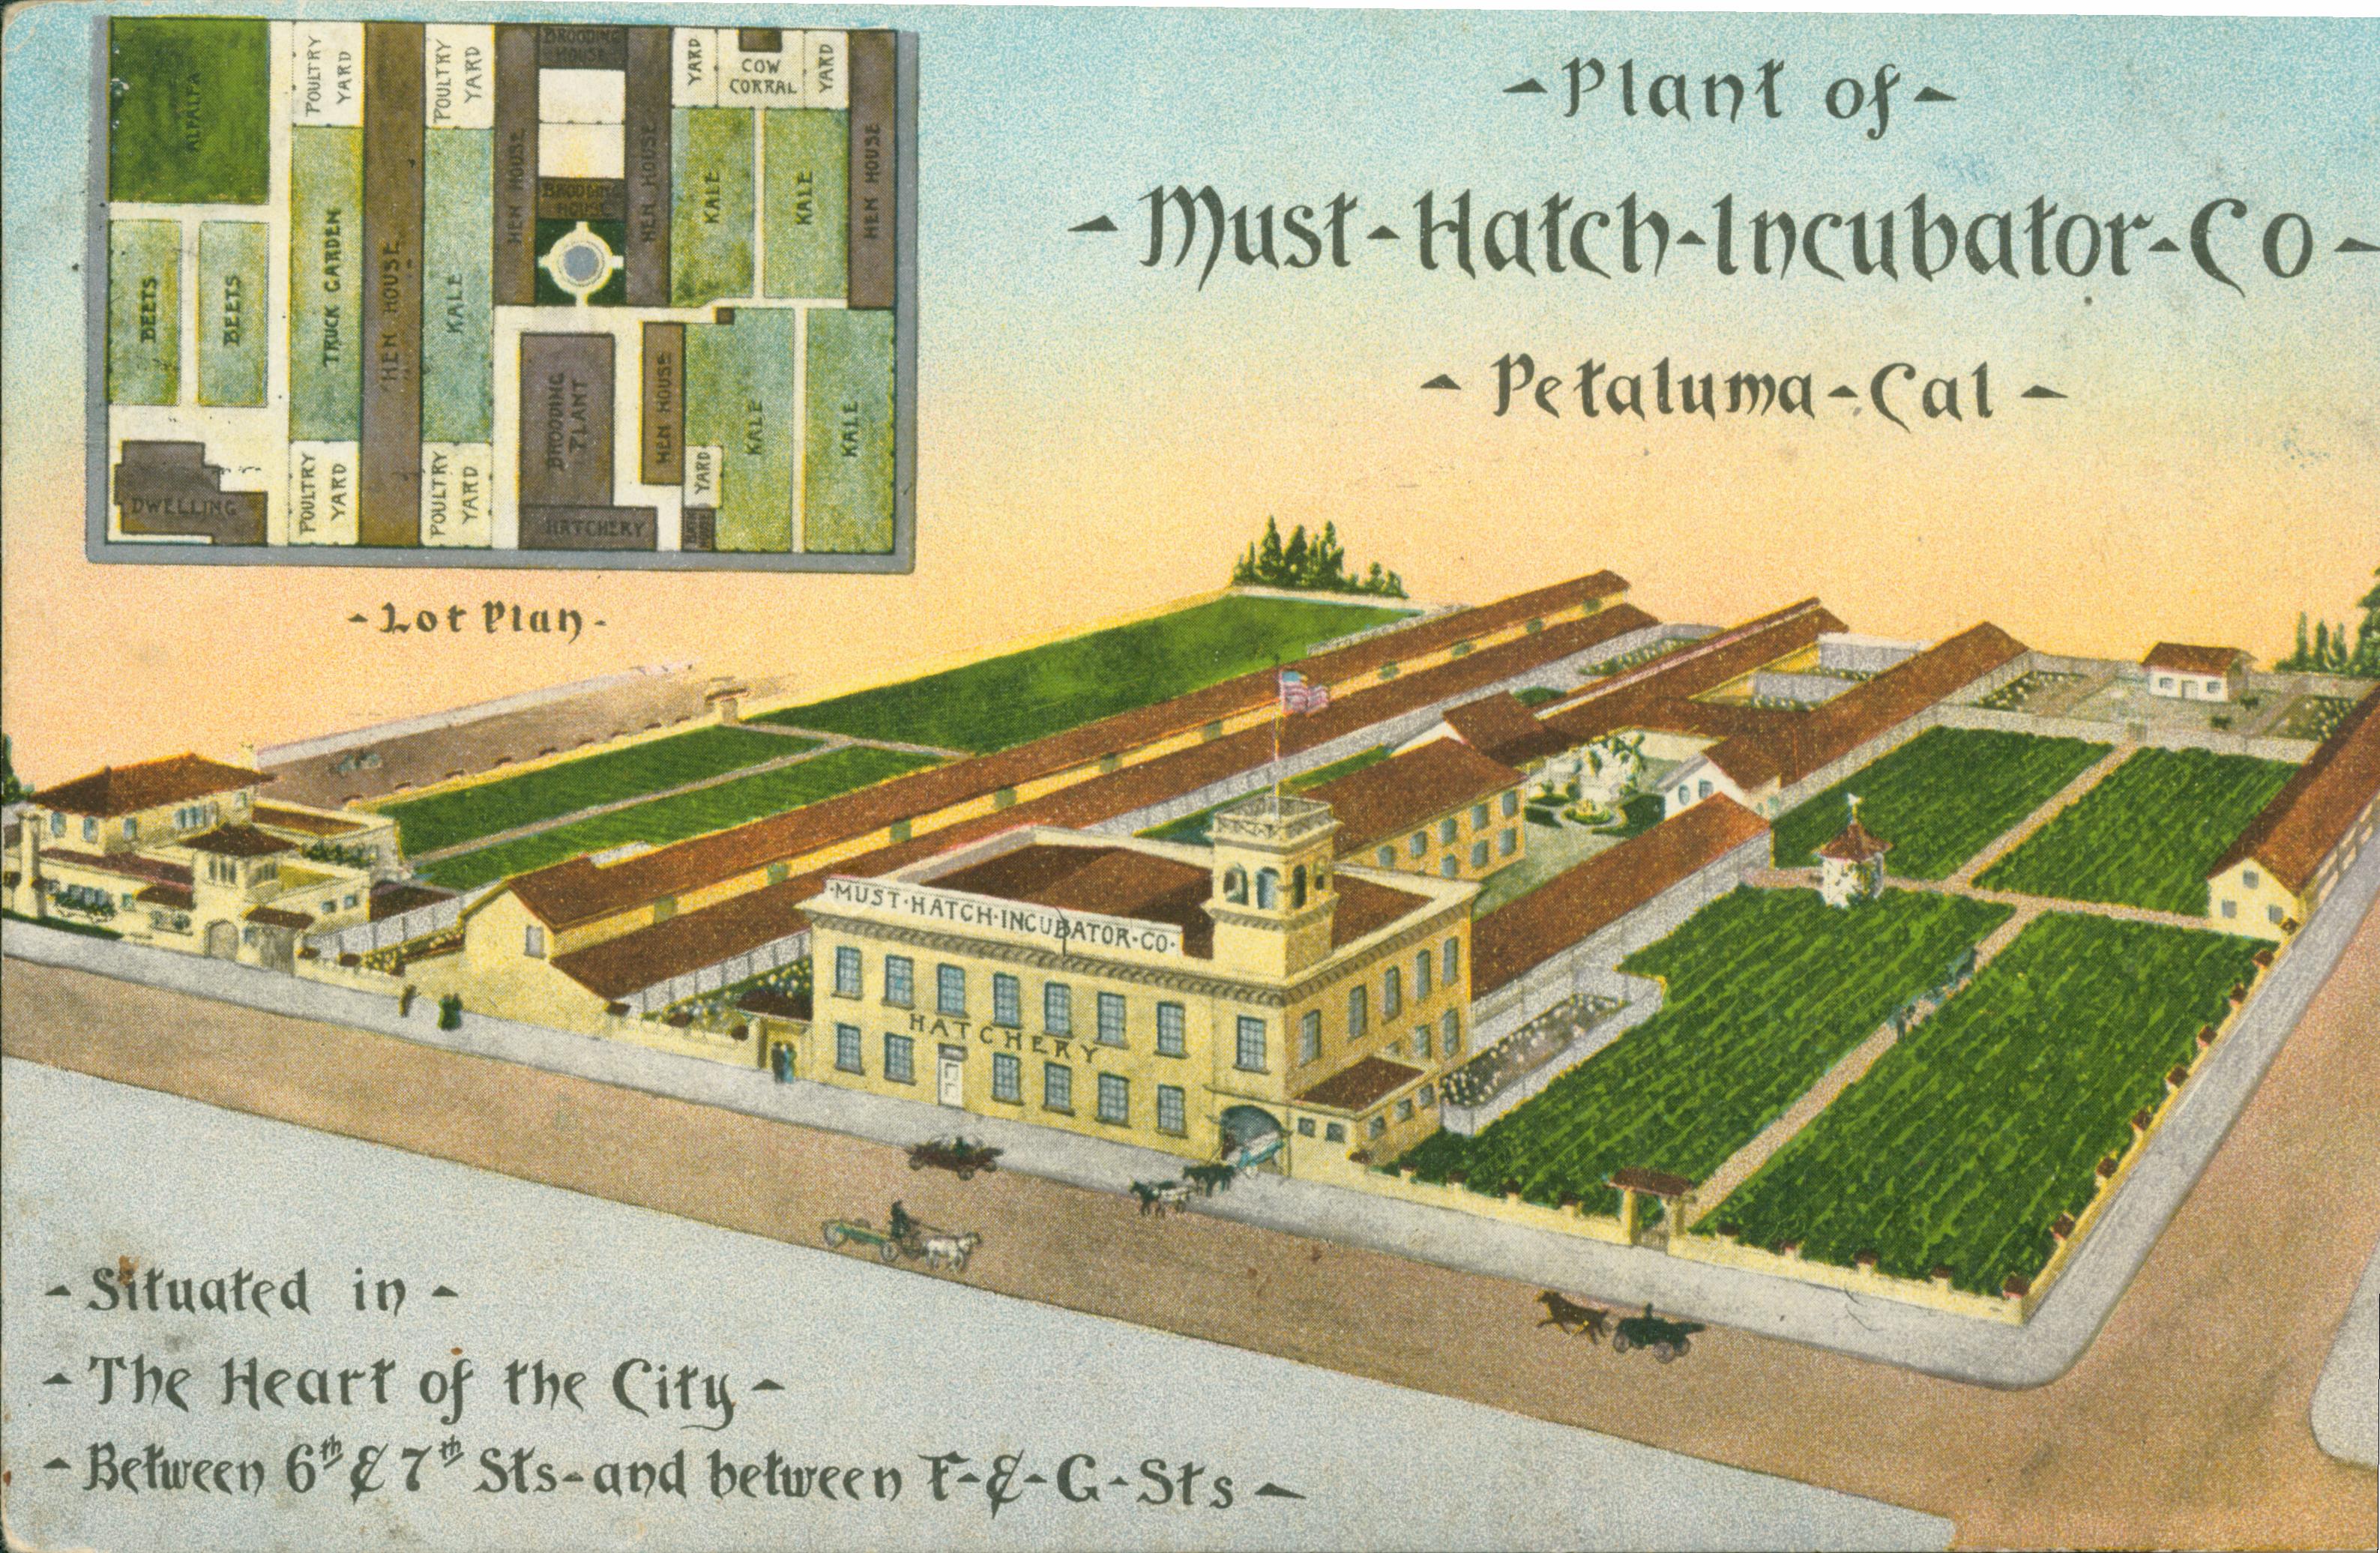 Shows a bird's eye view of the Must Hatch Incubator company plant with a lot plan in the upper left corner.